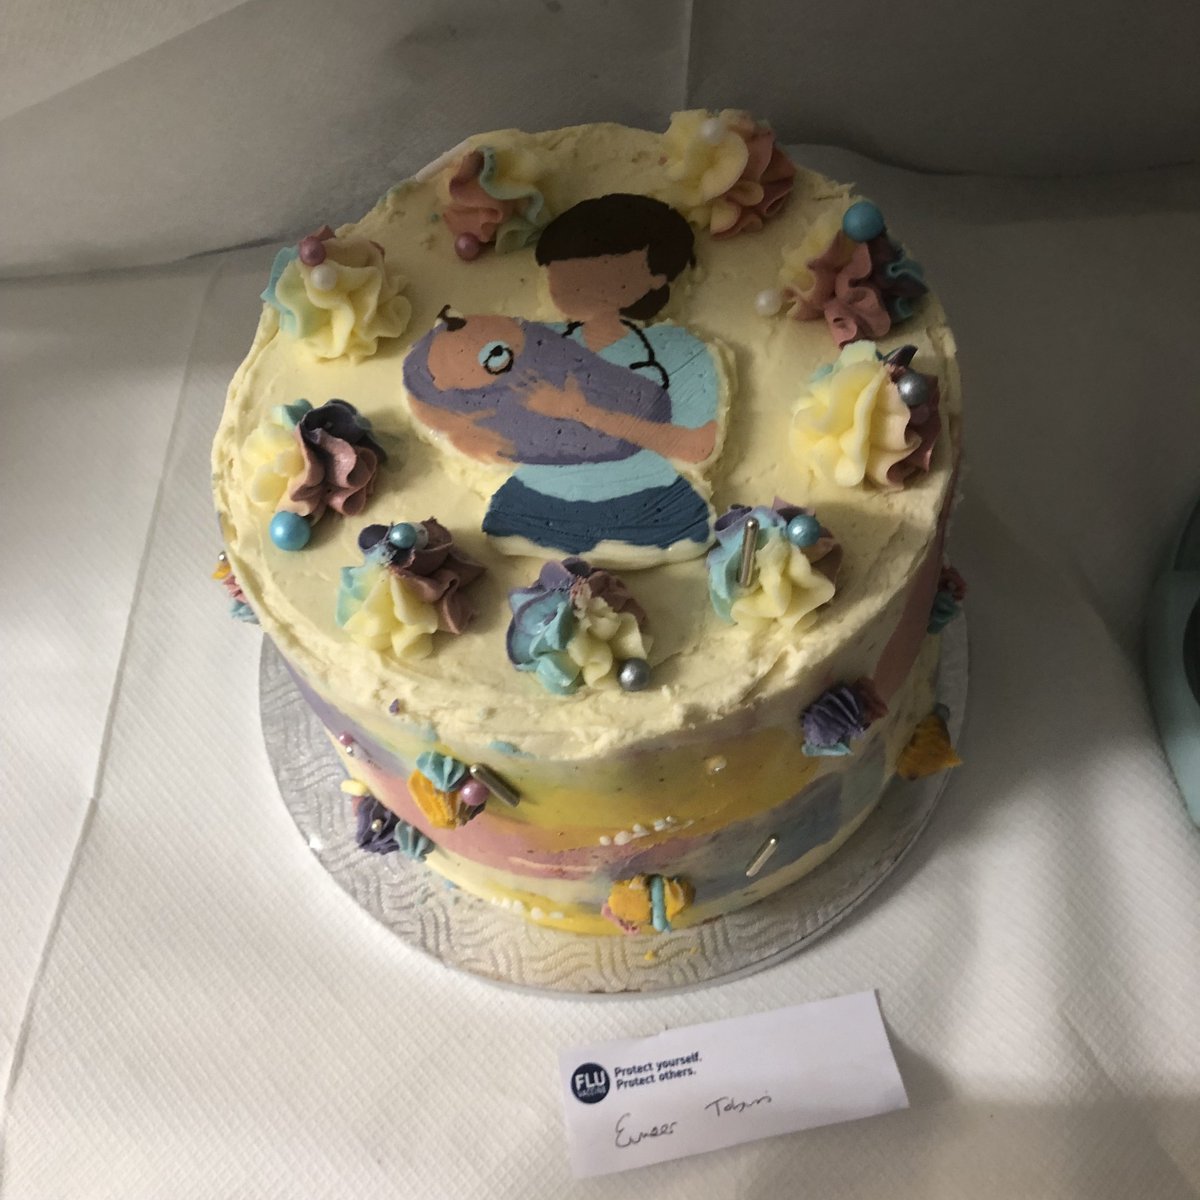 A recent event in UMHL to celebrate International Day of the Midwife. @ronan_eileen & MPDU Team hosted an event for TYs. @sylviamurphyt spoke about midwifery programmes in the DNM. Well done to all involved, hosts and attendees. #Midwifery #InternationalDayofTheMidwife